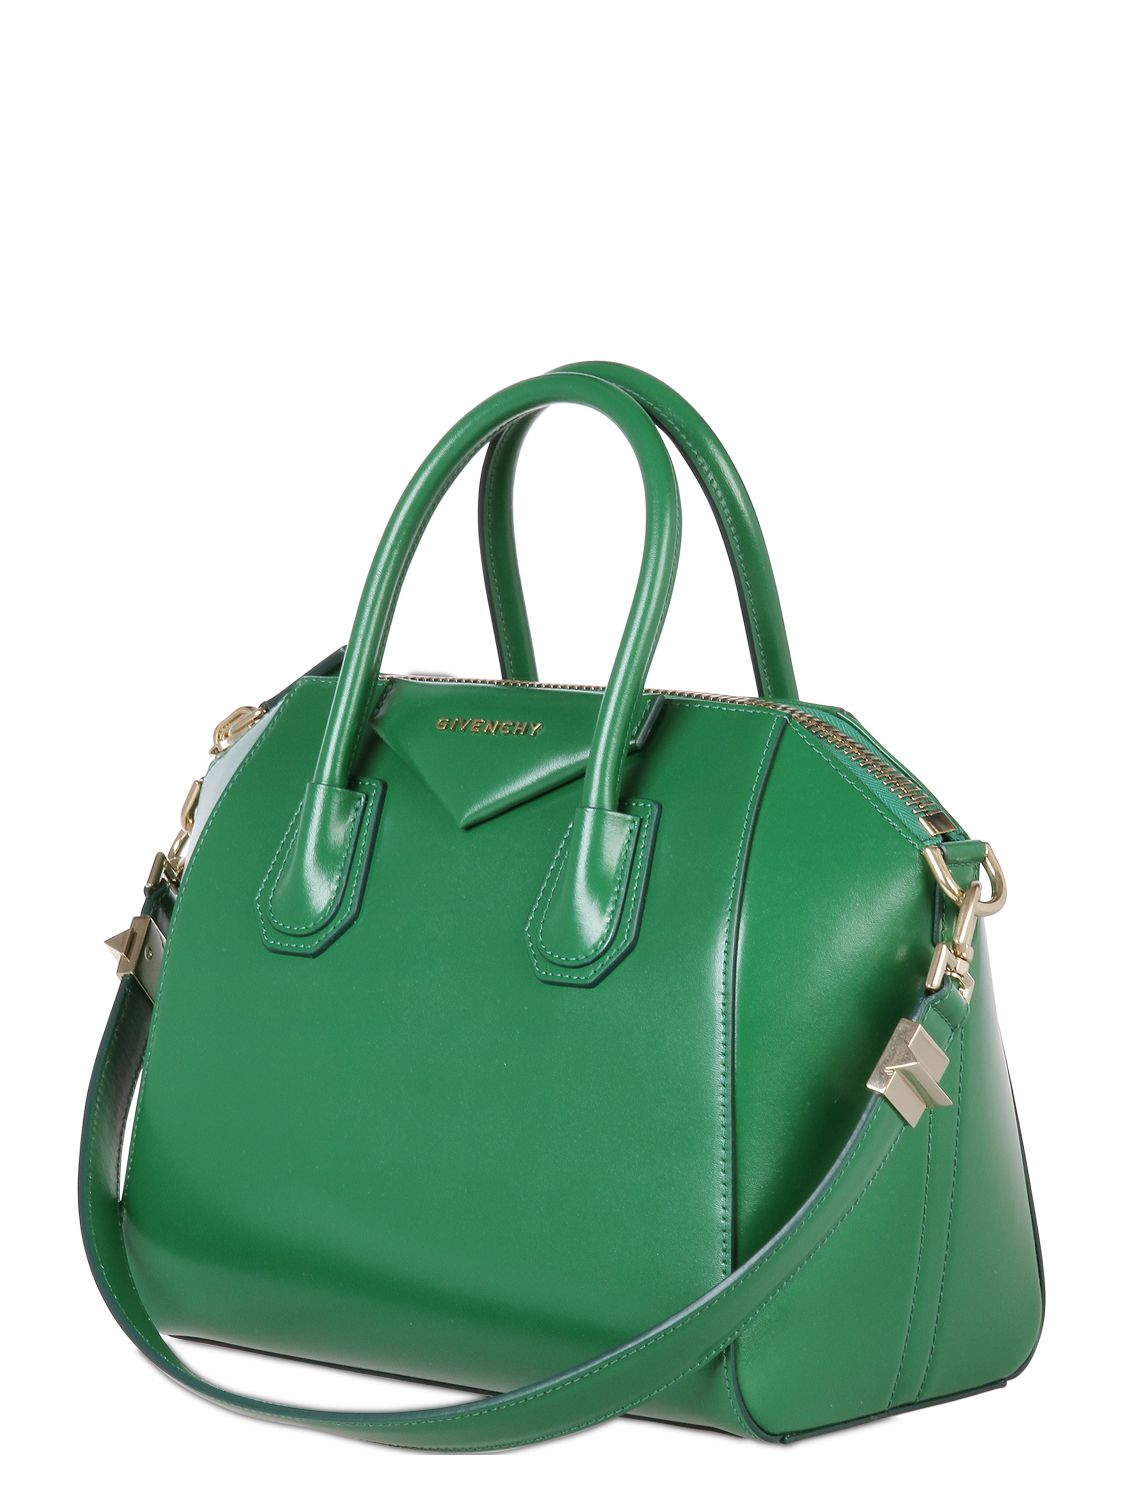 Givenchy Small Antigona Shiny Smooth Leather Bag in Green | Lyst